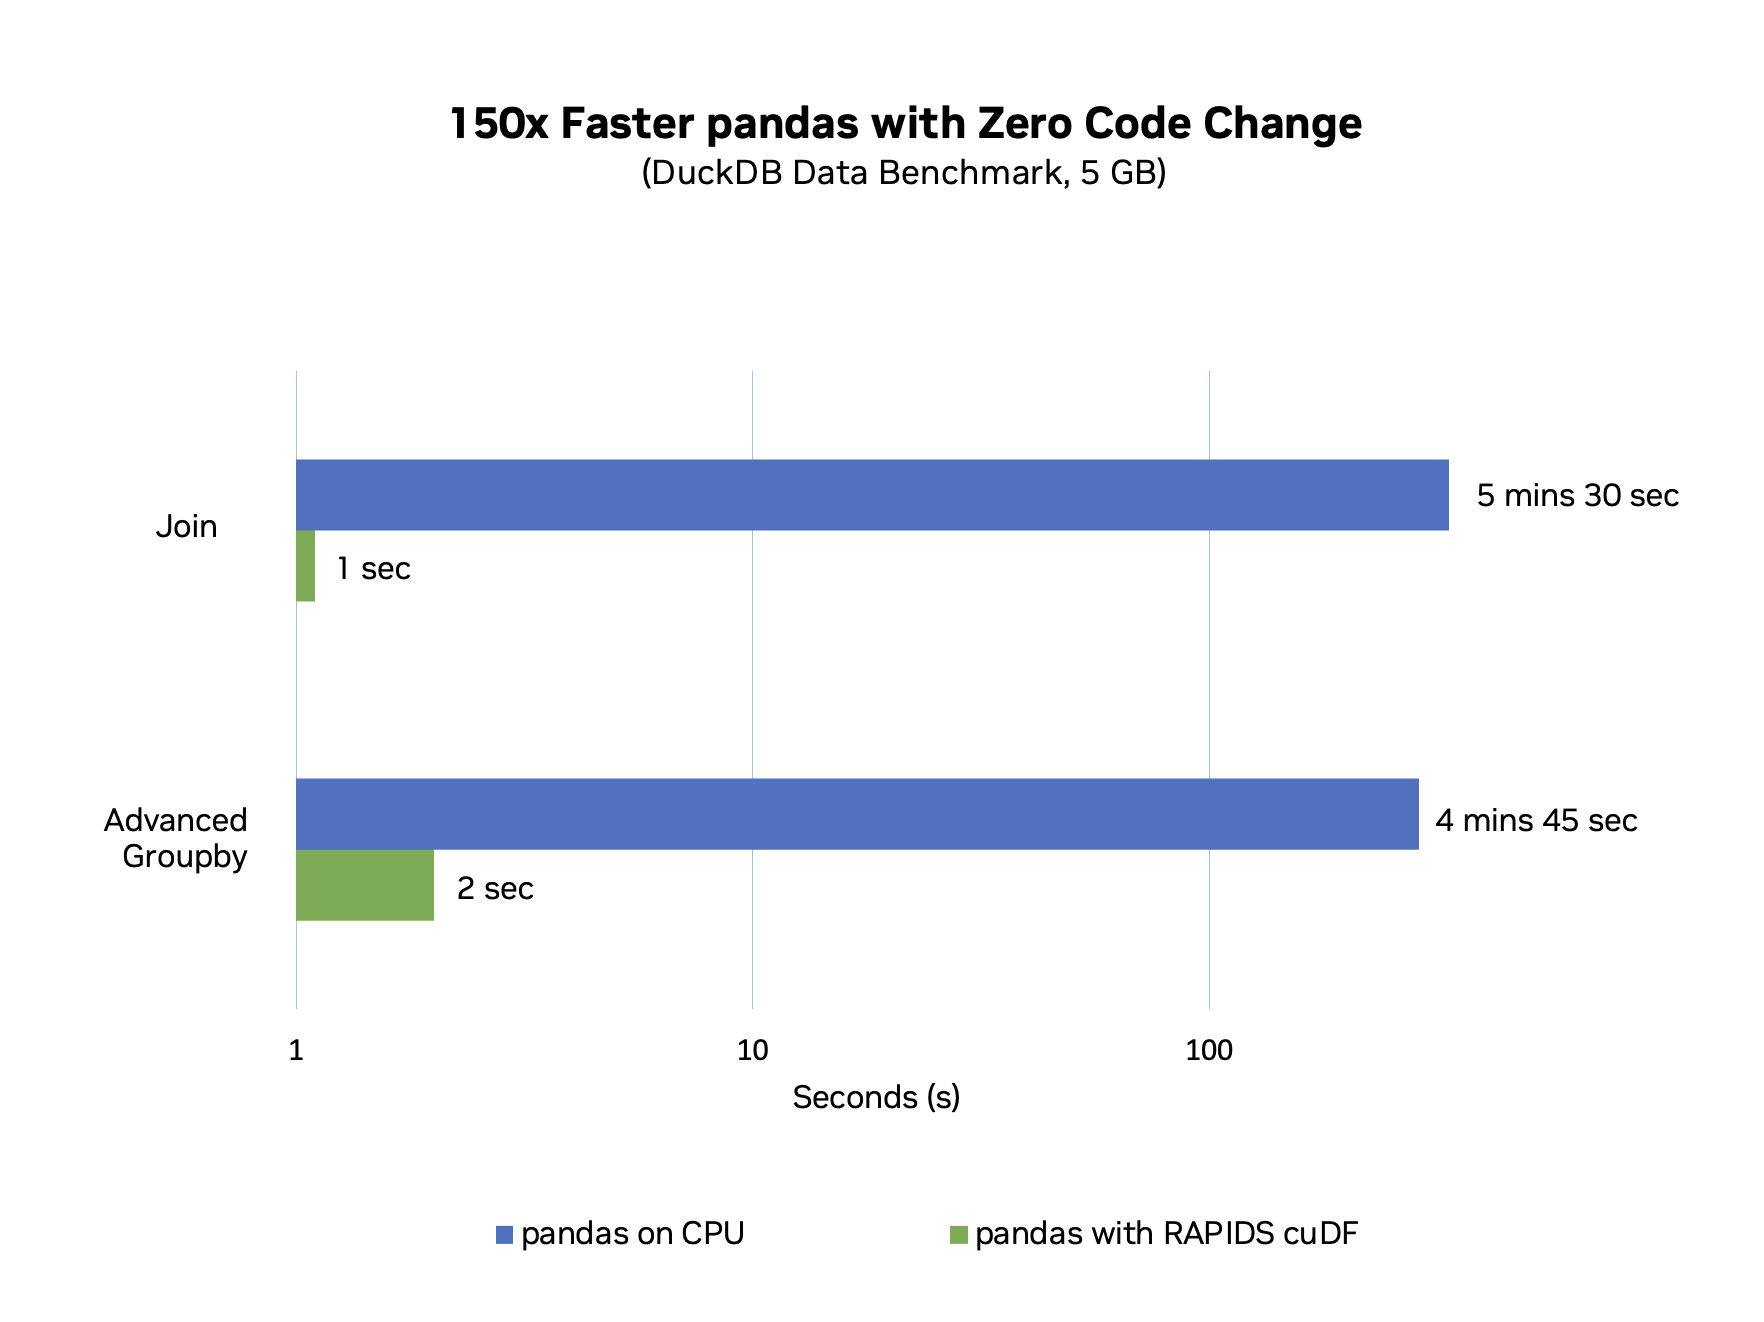 Bar chart shows a 150x speed increase using pandas with RAPIDS cuDF on NVIDIA Grace Hopper. The 10 join operations take only 1 second with RAPIDS cuDF as opposed to 336 seconds with pandas on CPU, while the 10 groupby advanced operations take 2 seconds with RAPIDS cuDF compared to 288 seconds with pandas on CPU.